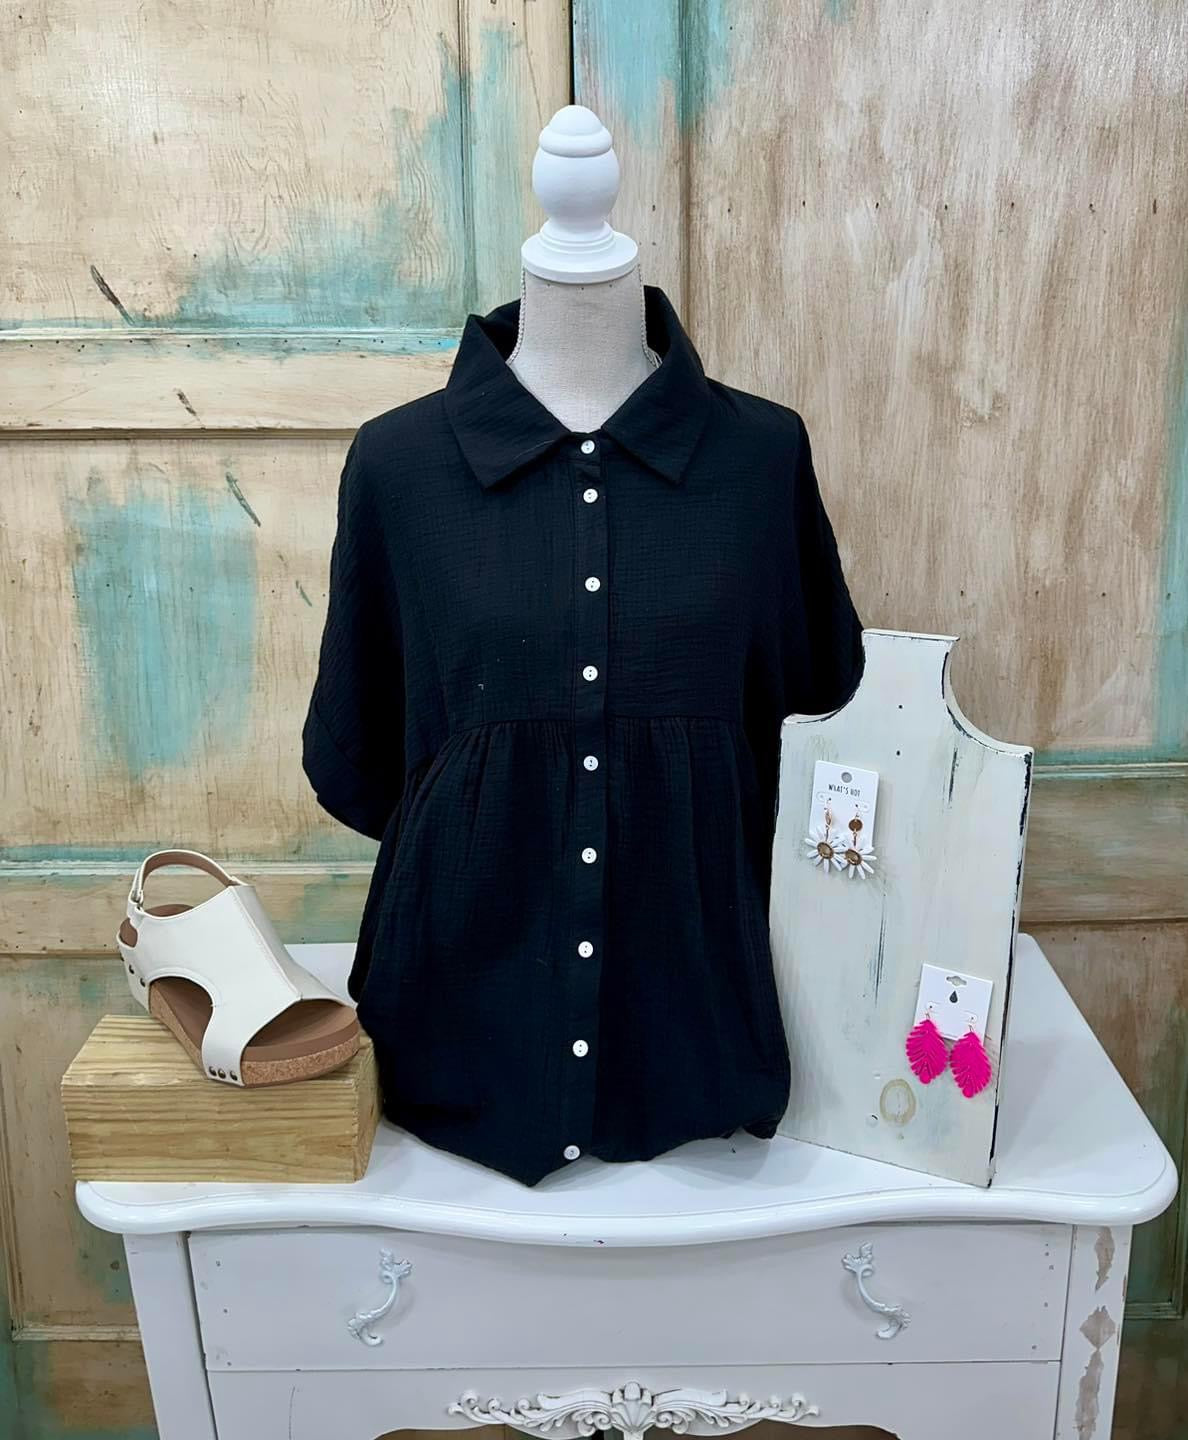 Black Button Down Baby Doll Top w/ Dolman Sleeves